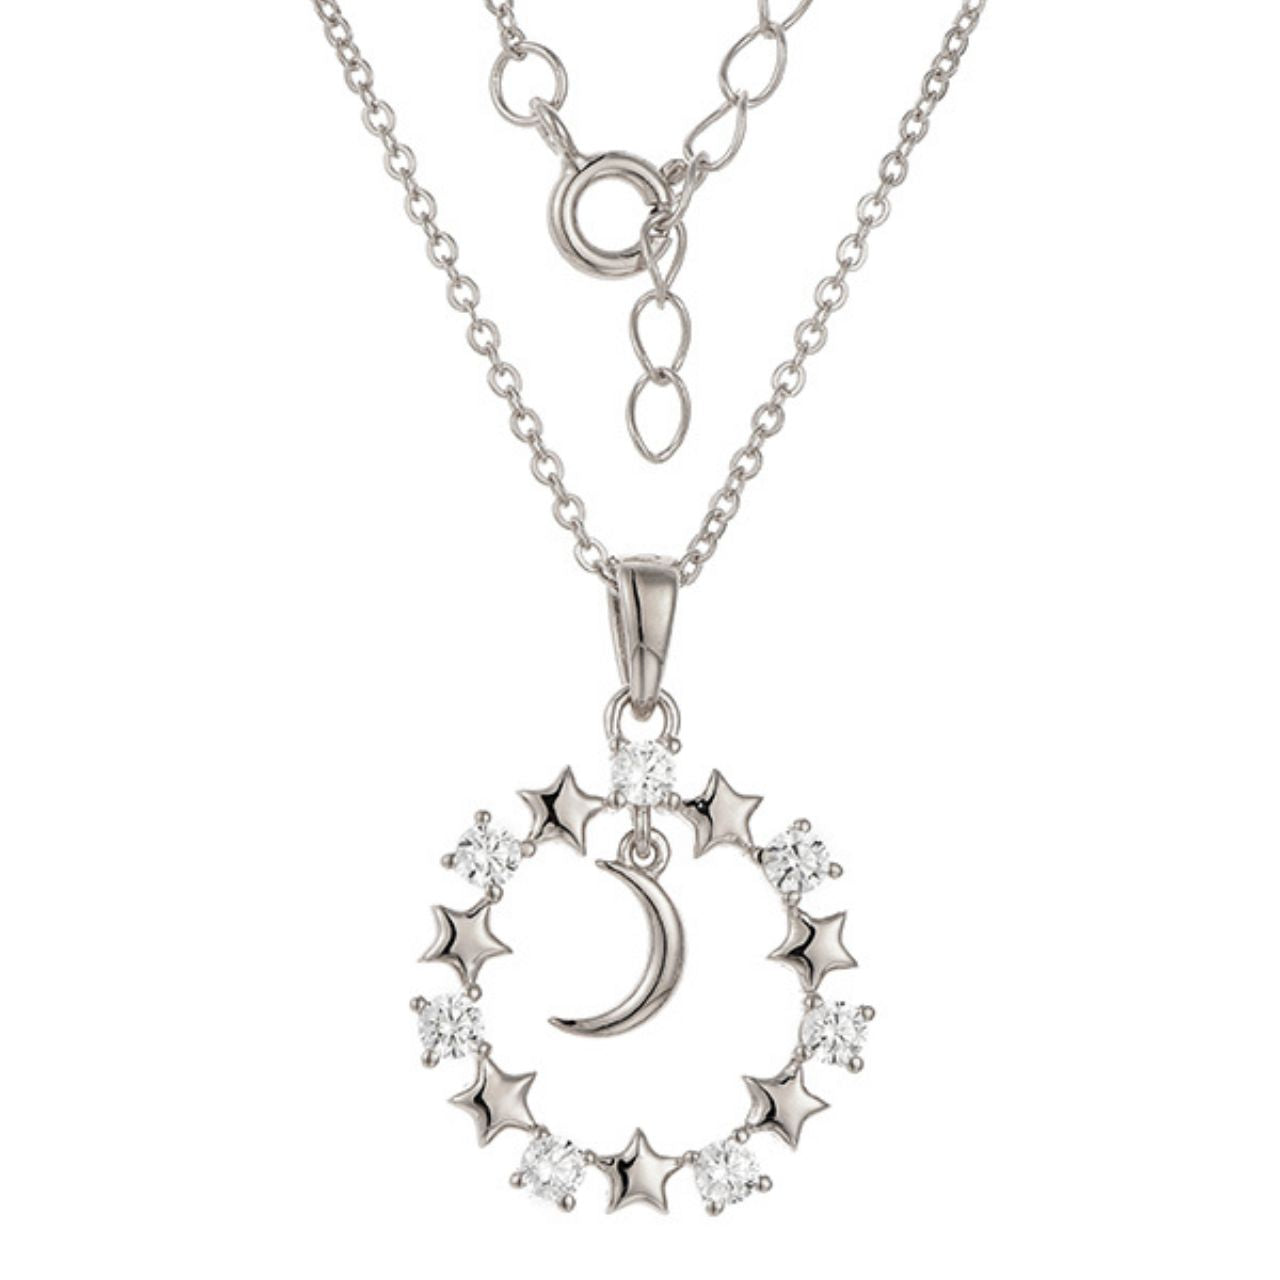 Silver Starry Night Necklace by Kilkenny Silver  Sterling silver necklace with has a moon surrounded by stars and sparkly cubic zirconia to give starry night design.